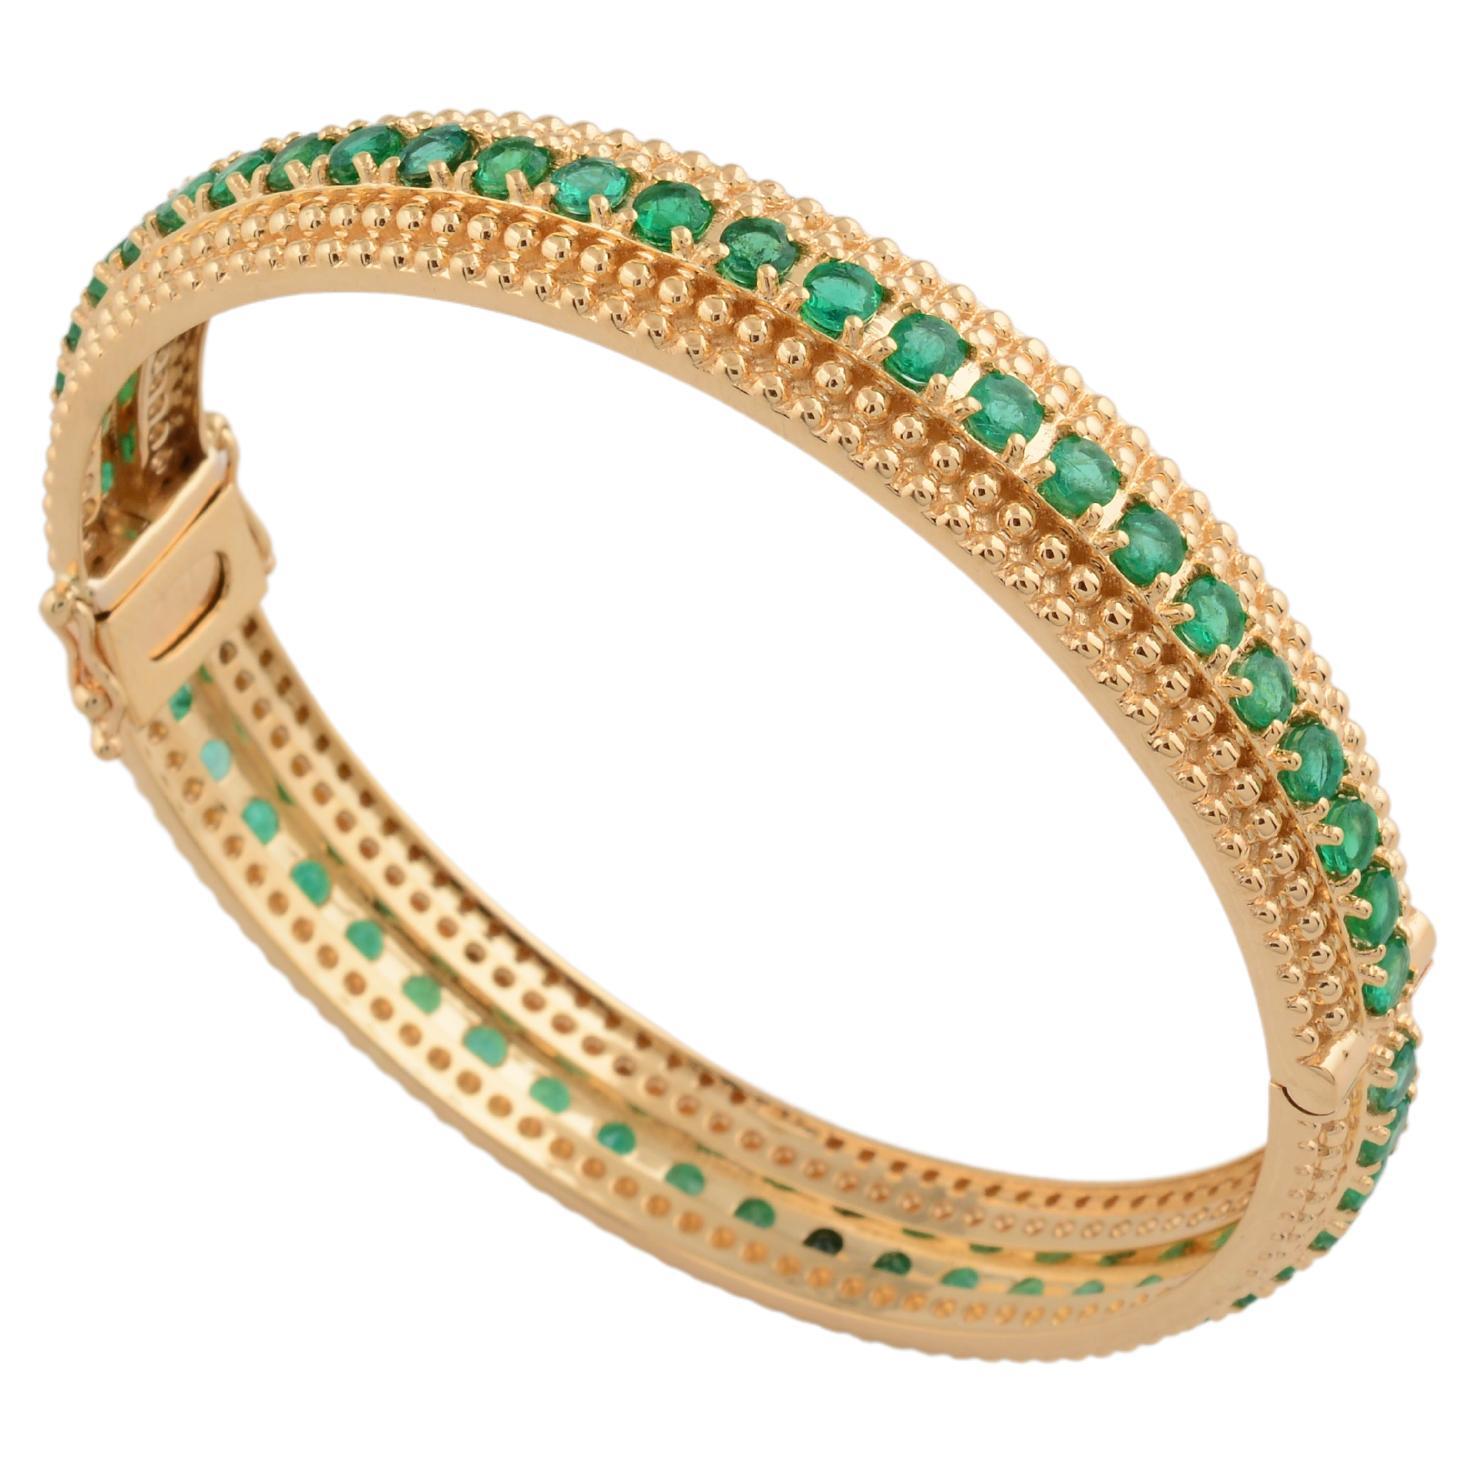 Item Code :- SEB-6083
Gross Wt. :- 35.94 gm
18k Yellow Gold Wt. :- 34.59 gm
Emerald Wt. :- 6.75 Ct. 

✦ Sizing
.....................
We can adjust most items to fit your sizing preferences. Most items can be made to any size and length. Please leave